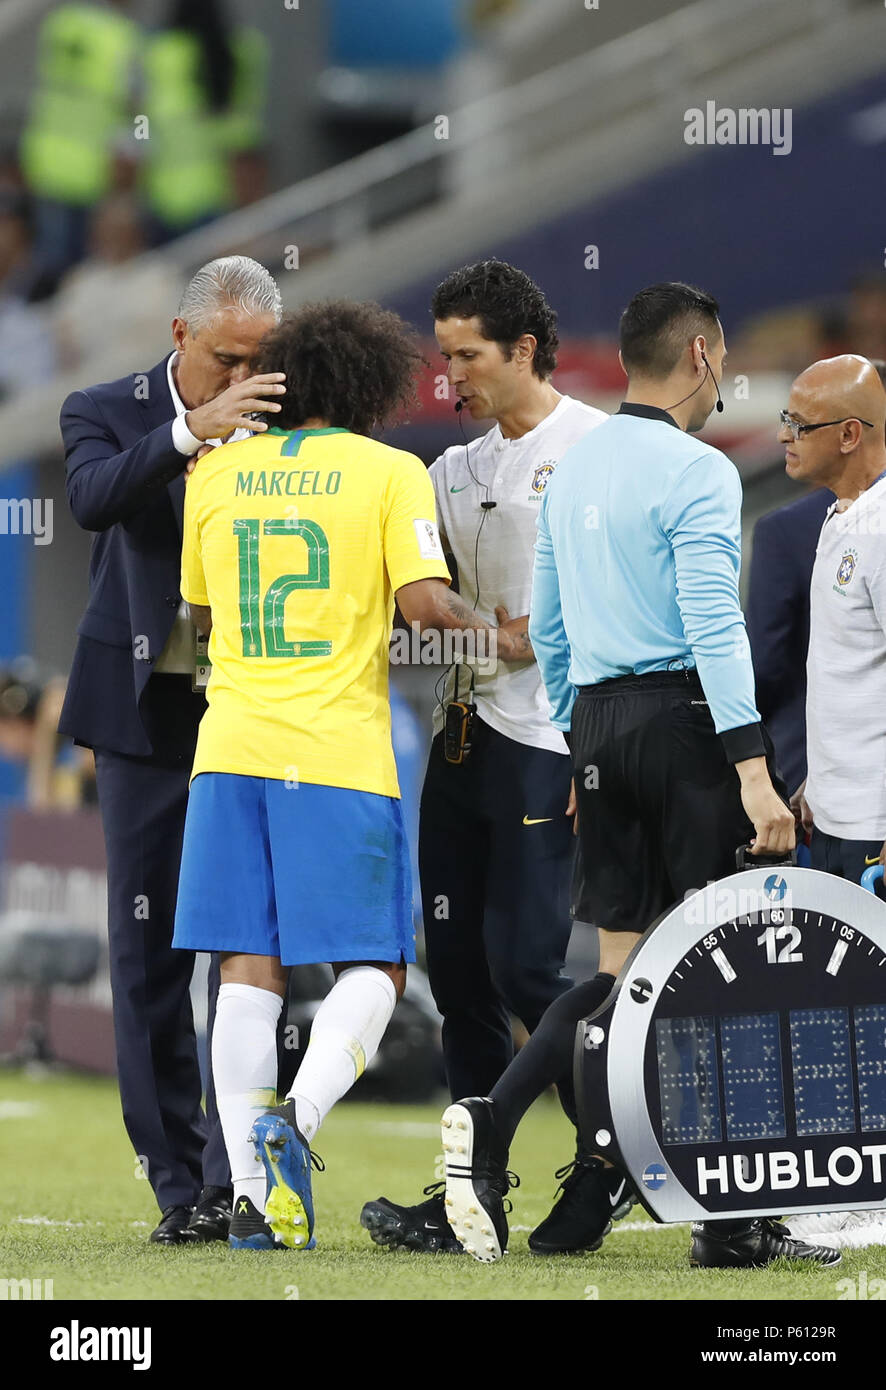 Moscow, Russia. 27th June, 2018. Marcelo (2nd L) of Brazil is substituted off after his injury during the 2018 FIFA World Cup Group E match between Brazil and Serbia in Moscow, Russia, June 27, 2018. Credit: Cao Can/Xinhua/Alamy Live News Stock Photo